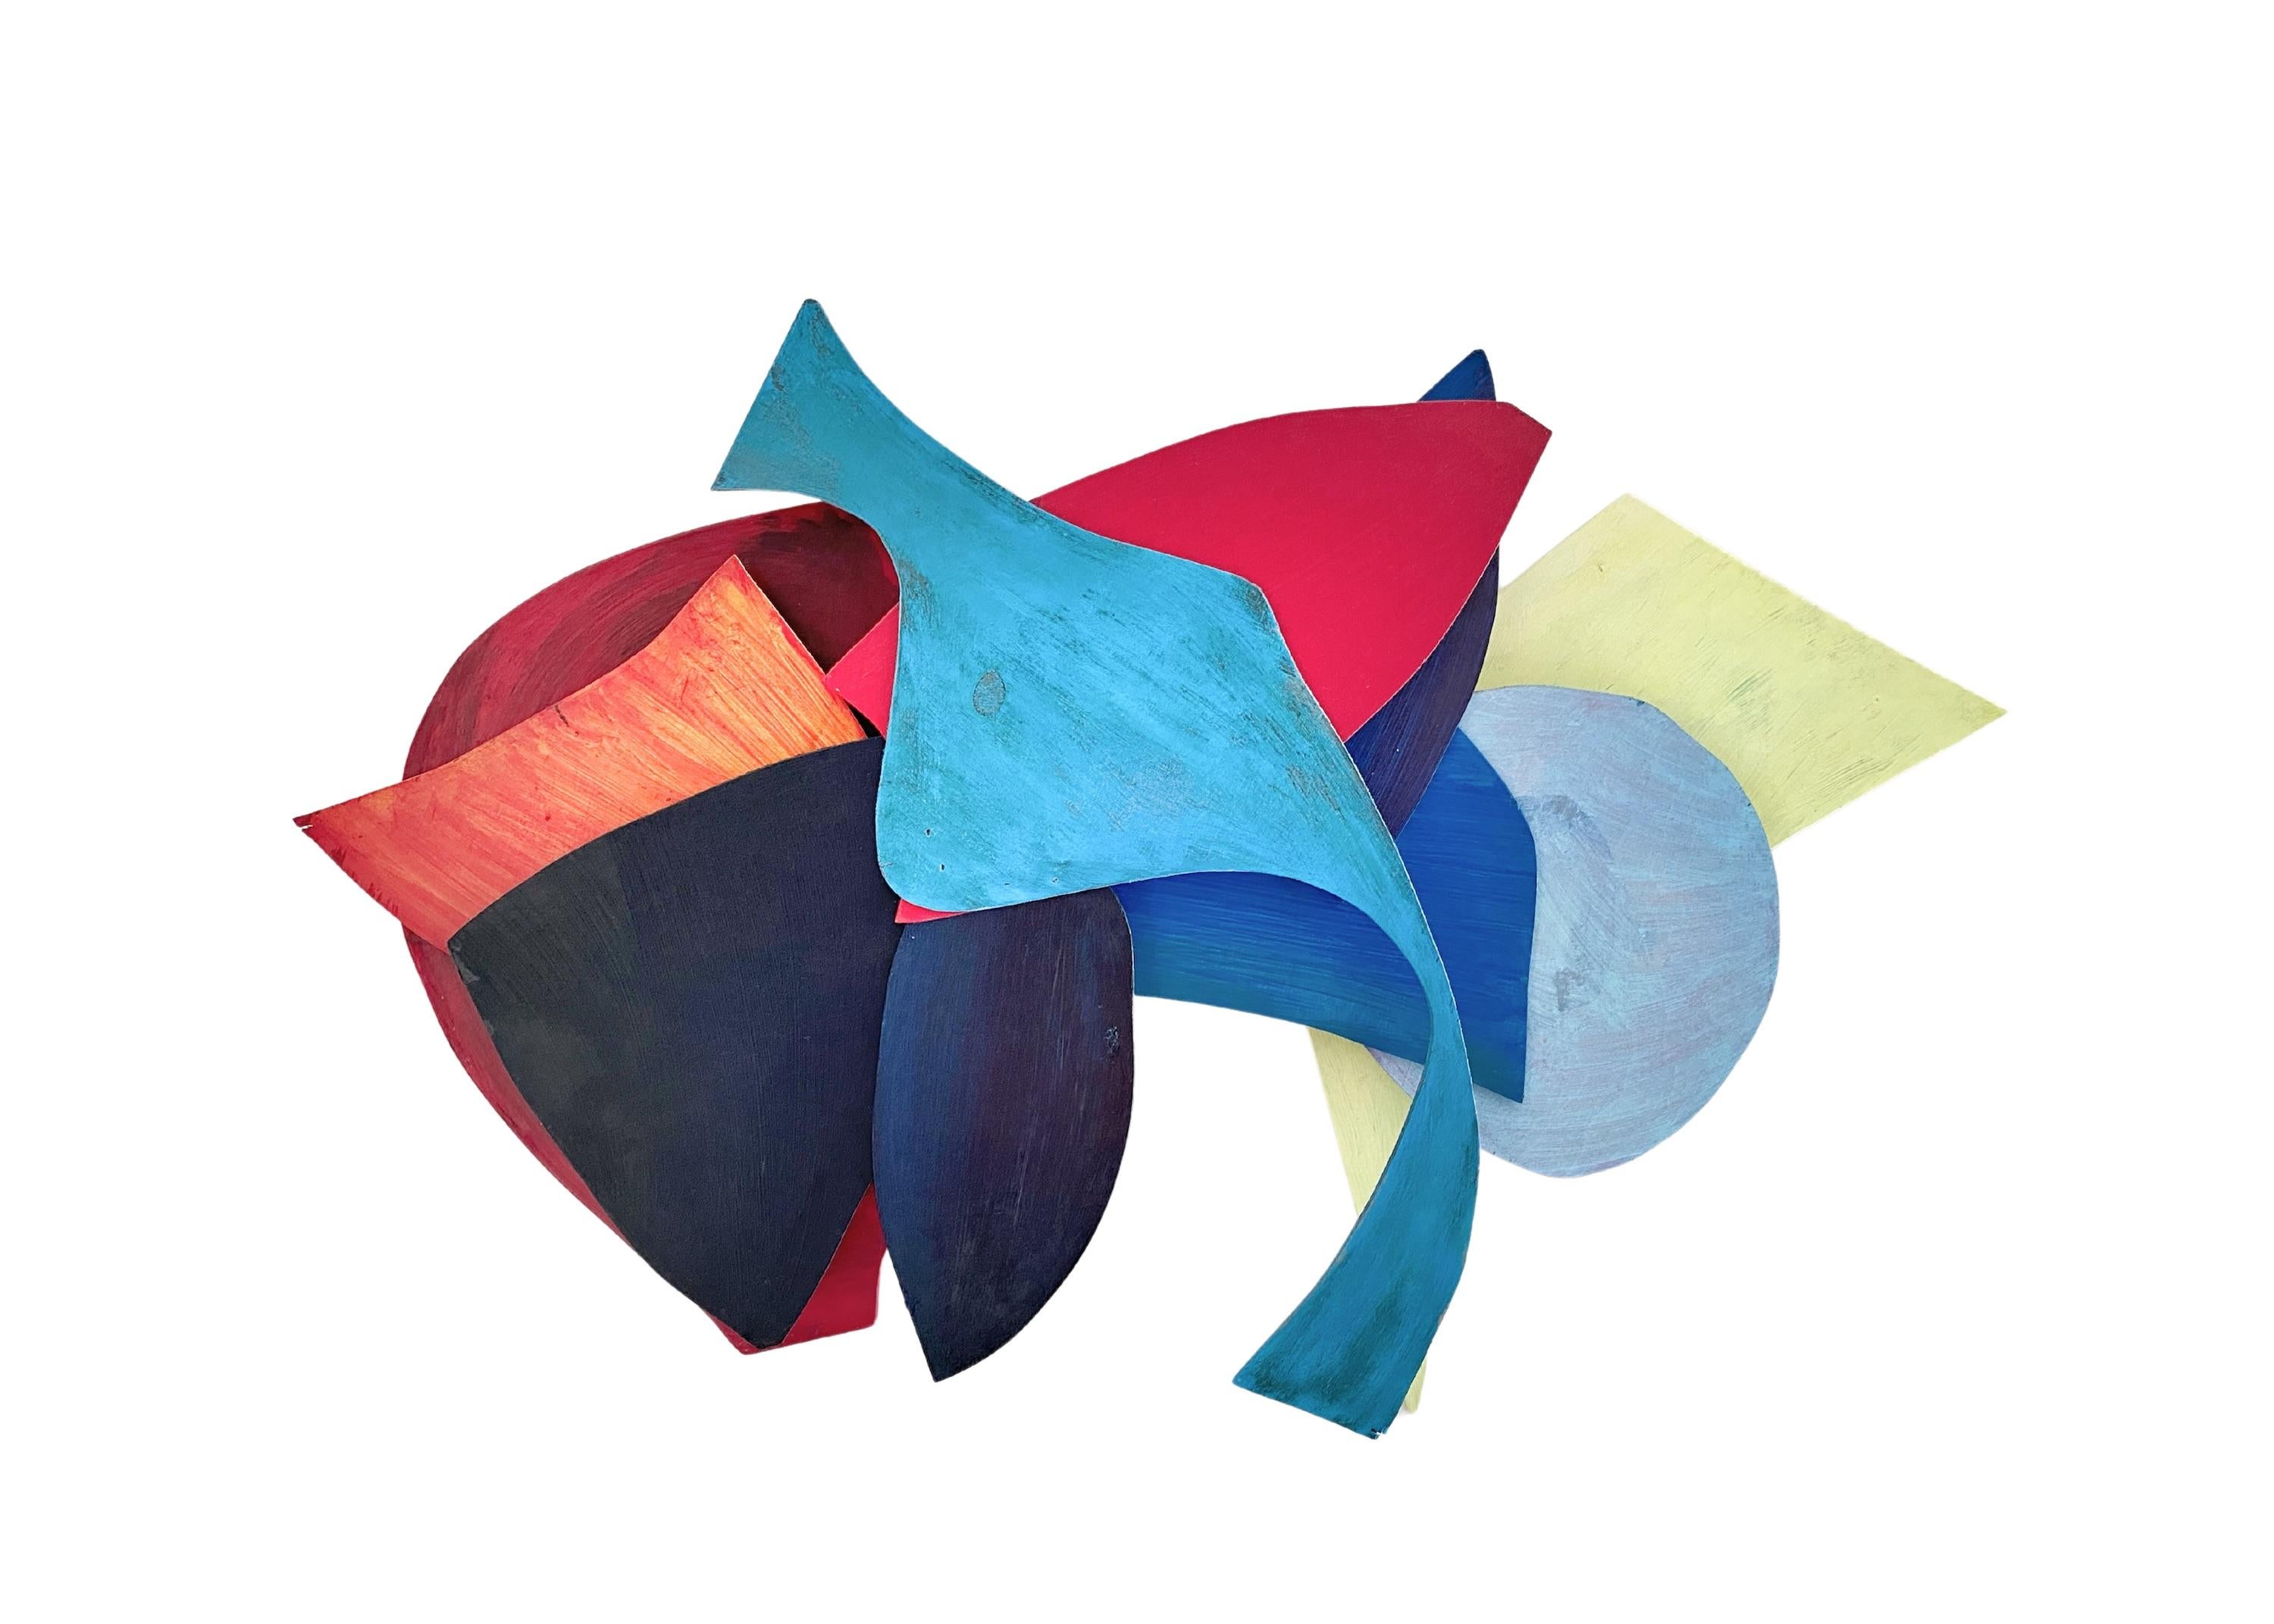 Zach Touchon Abstract Sculpture - GS02, Geometric Abstract Multicolor 3D Mixed Media Wall Sculpture